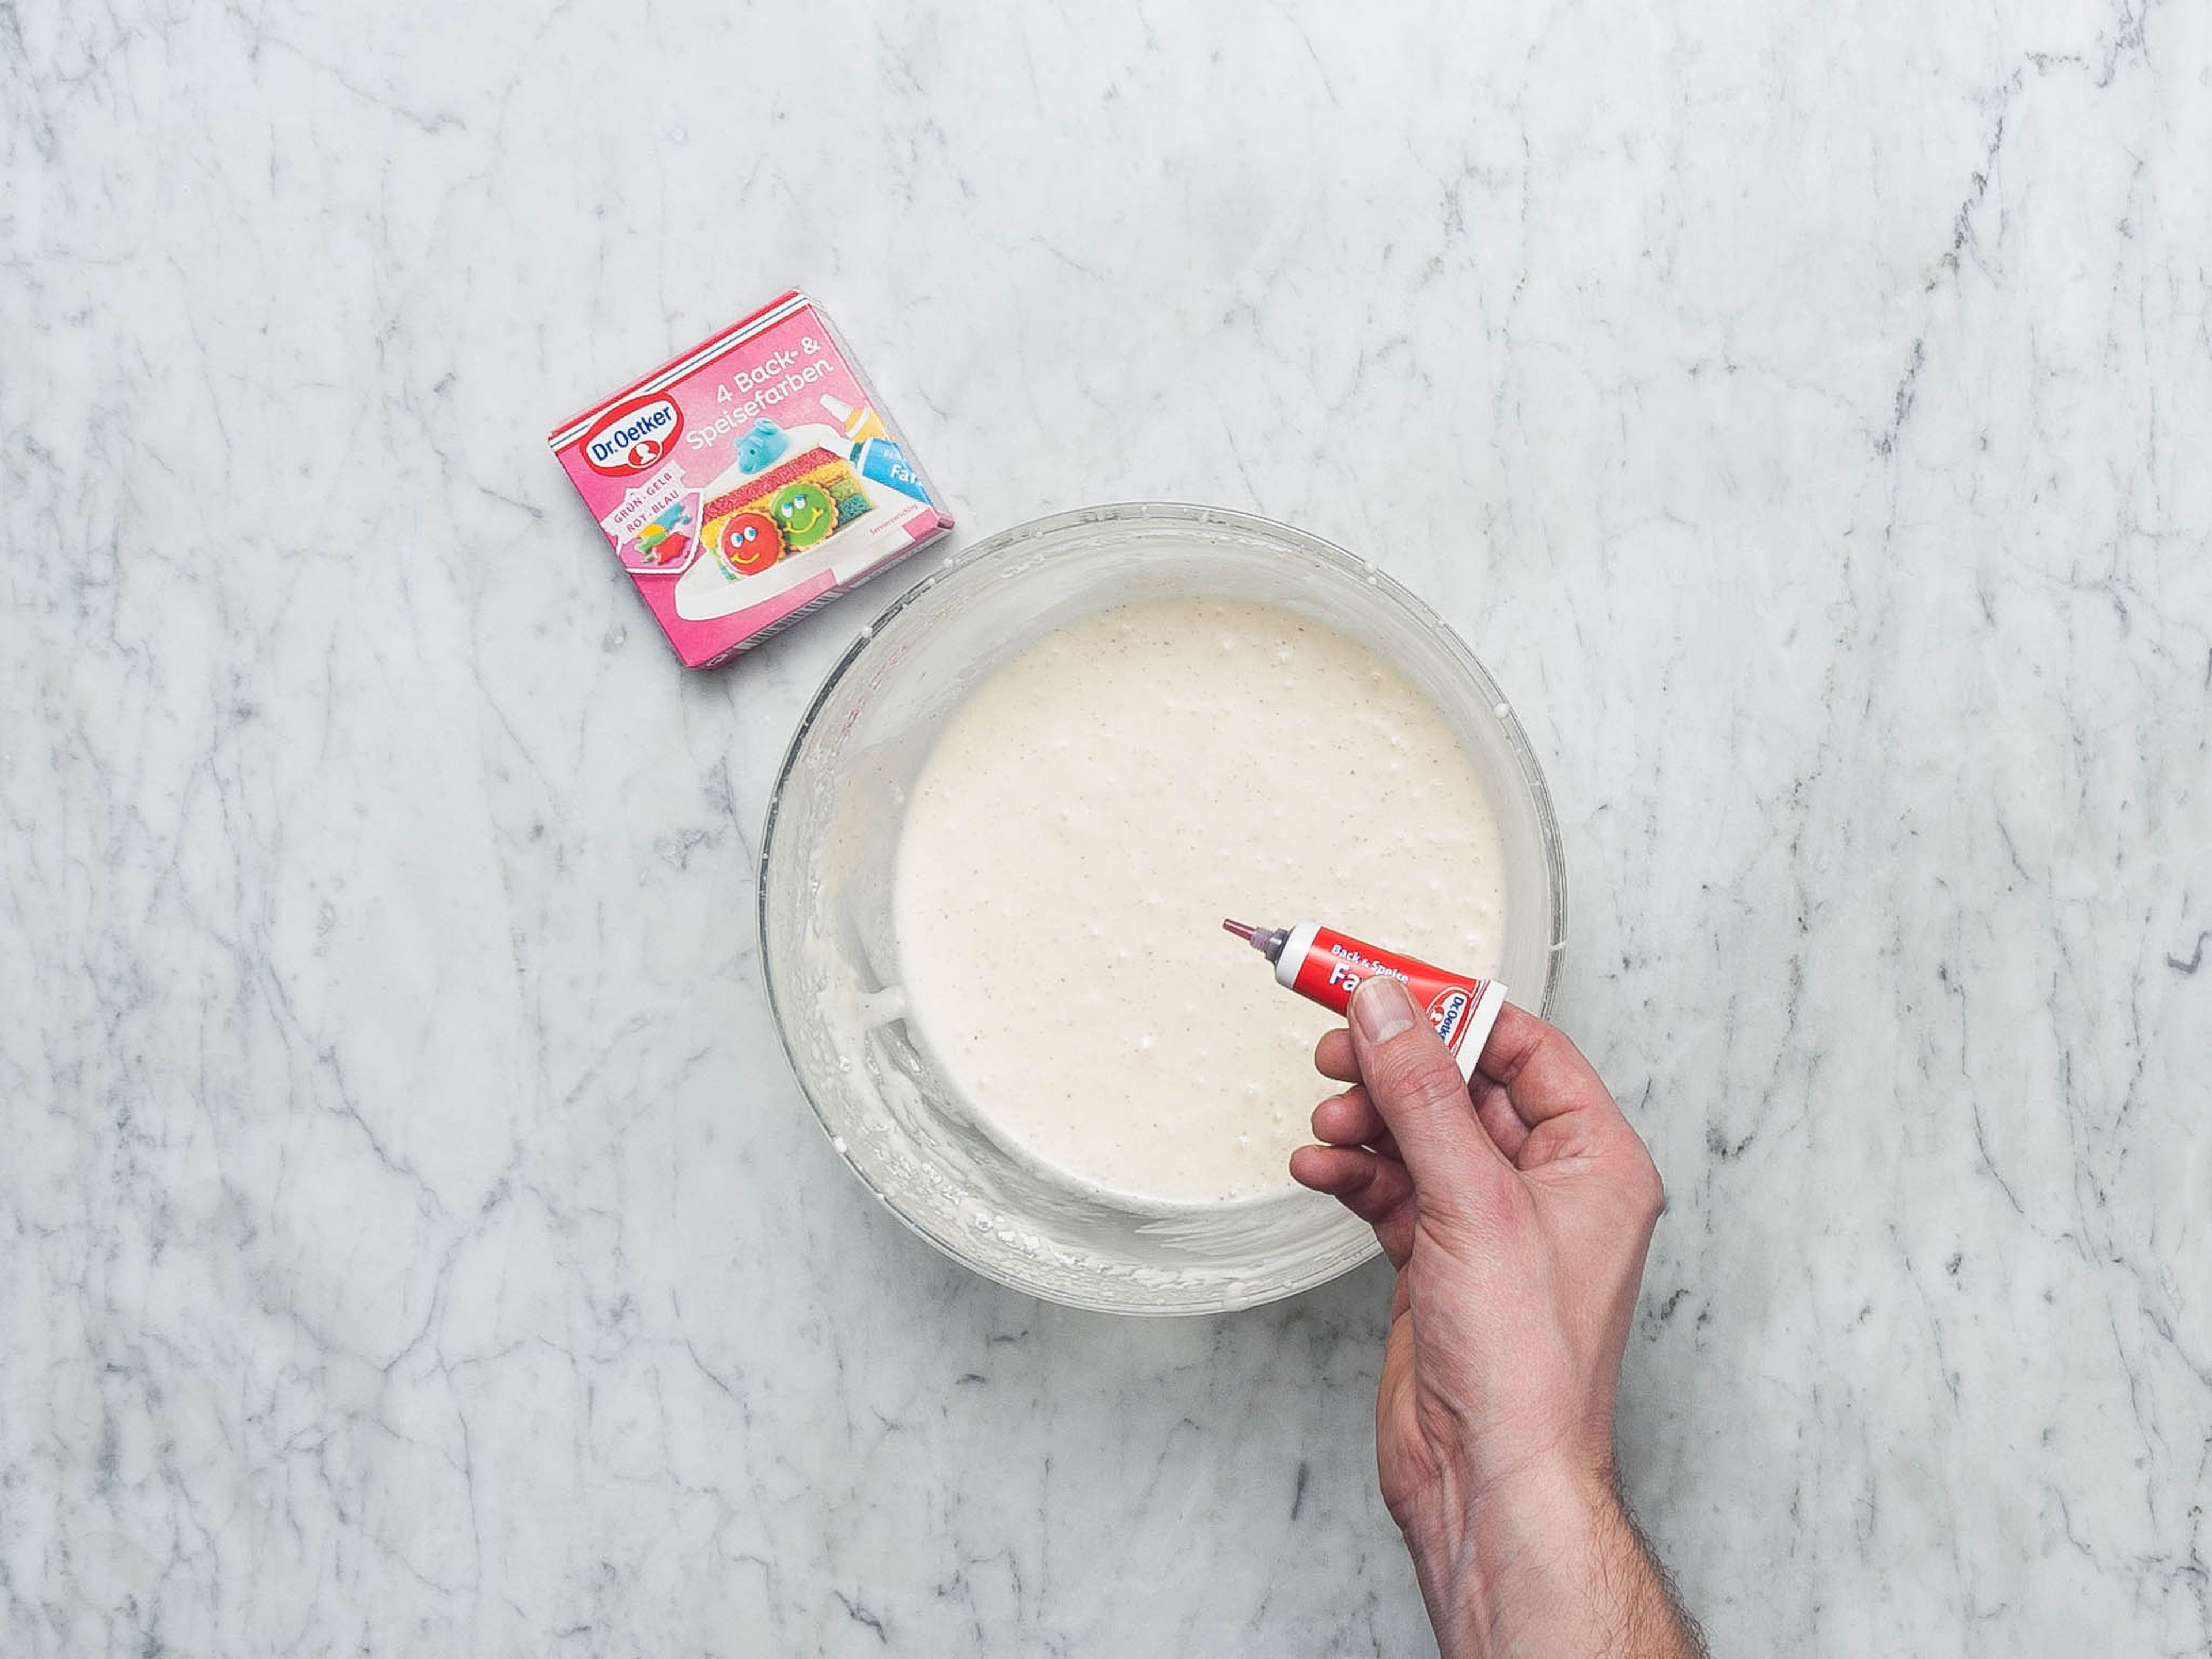 Meanwhile, make frosting: Add crème fraîche, powdered sugar, and remaining vanilla sugar to a medium mixing bowl. Beat until combined and thickened slightly. Add a drop or two of food coloring until the desired shade of pink is reached. Stir until evenly incorporated.